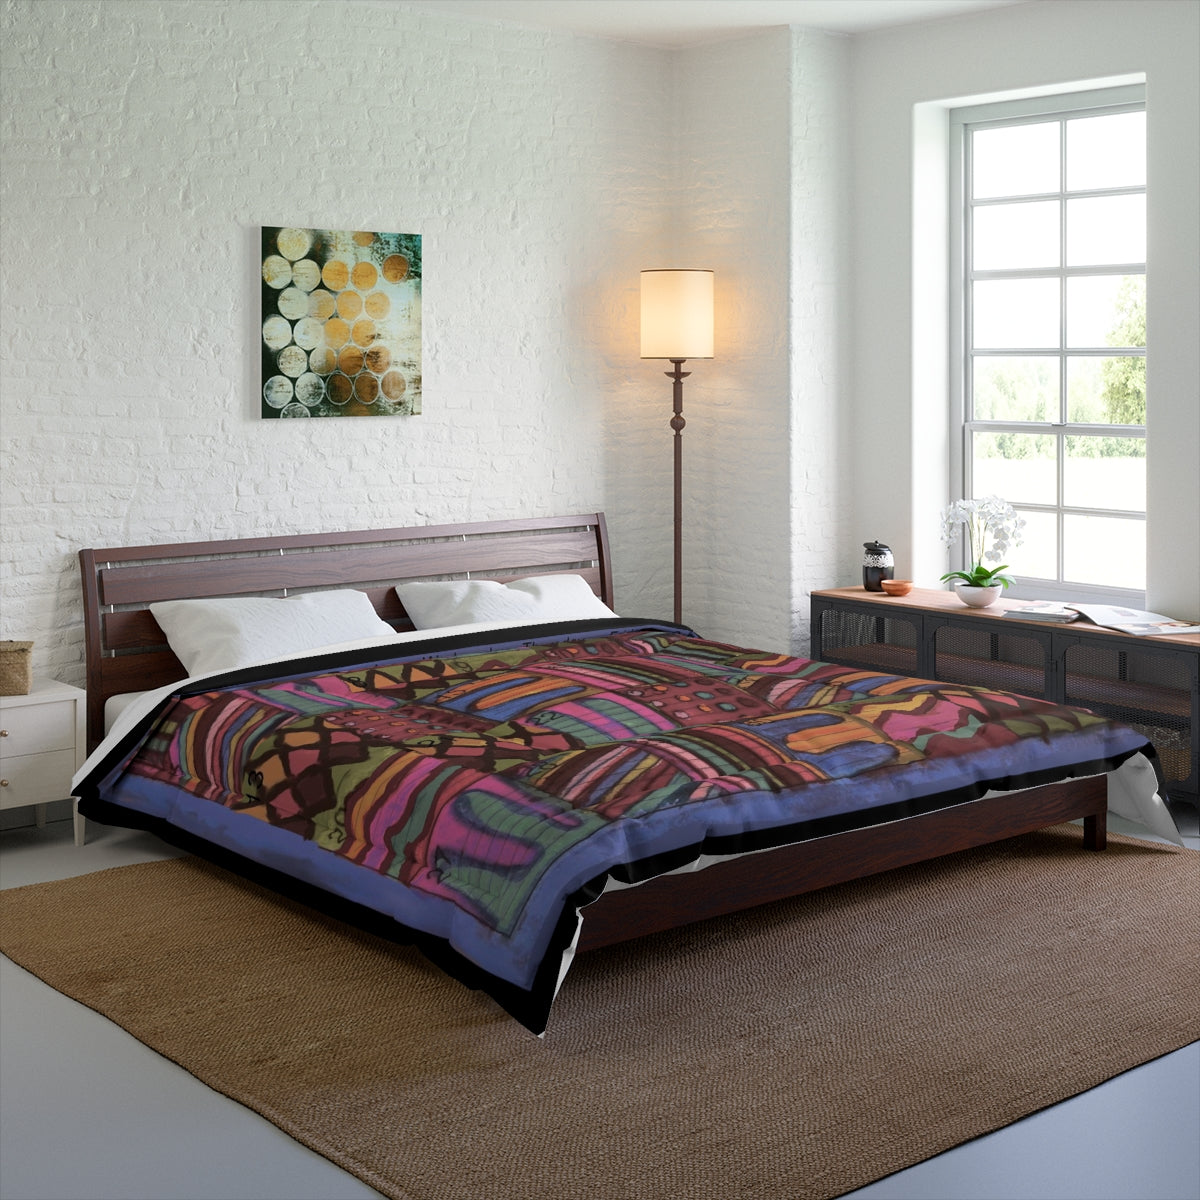 Comforter: Psychedelic Calendar(tm) - Muted - 104x88 - MiE Designs Shop. Barely visible black edges around calendar. Bedroom